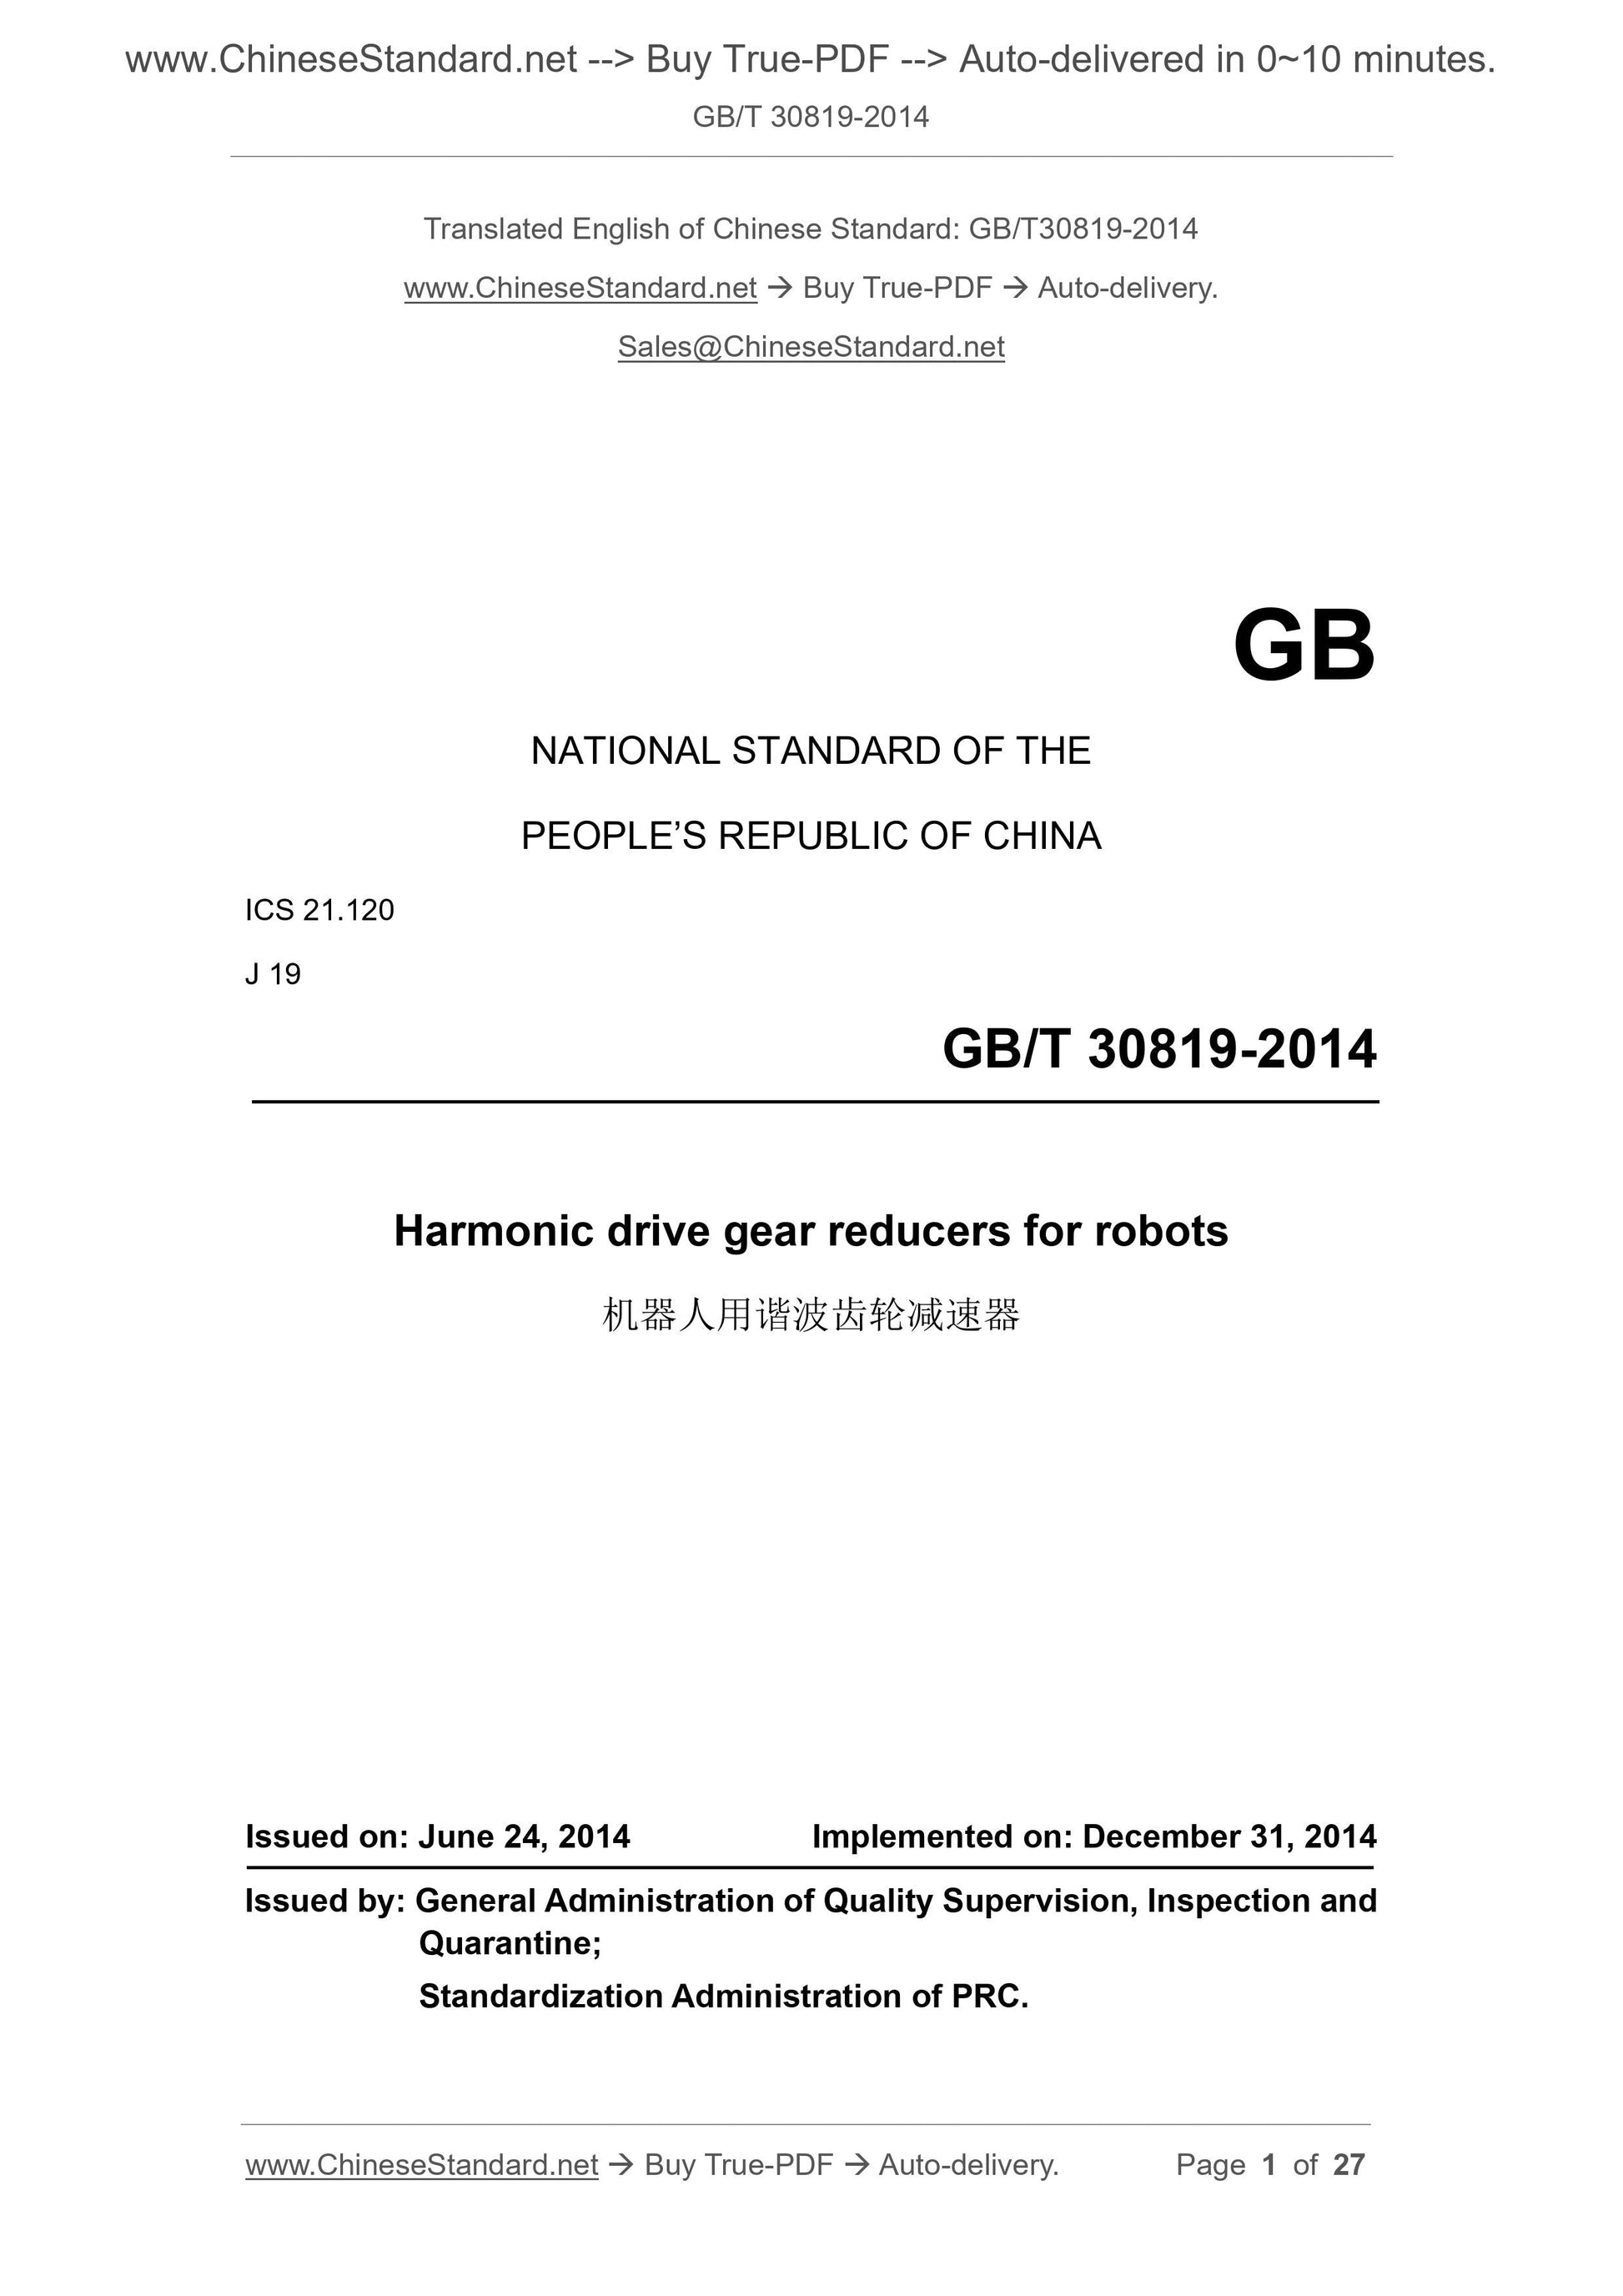 GB/T 30819-2014 Page 1